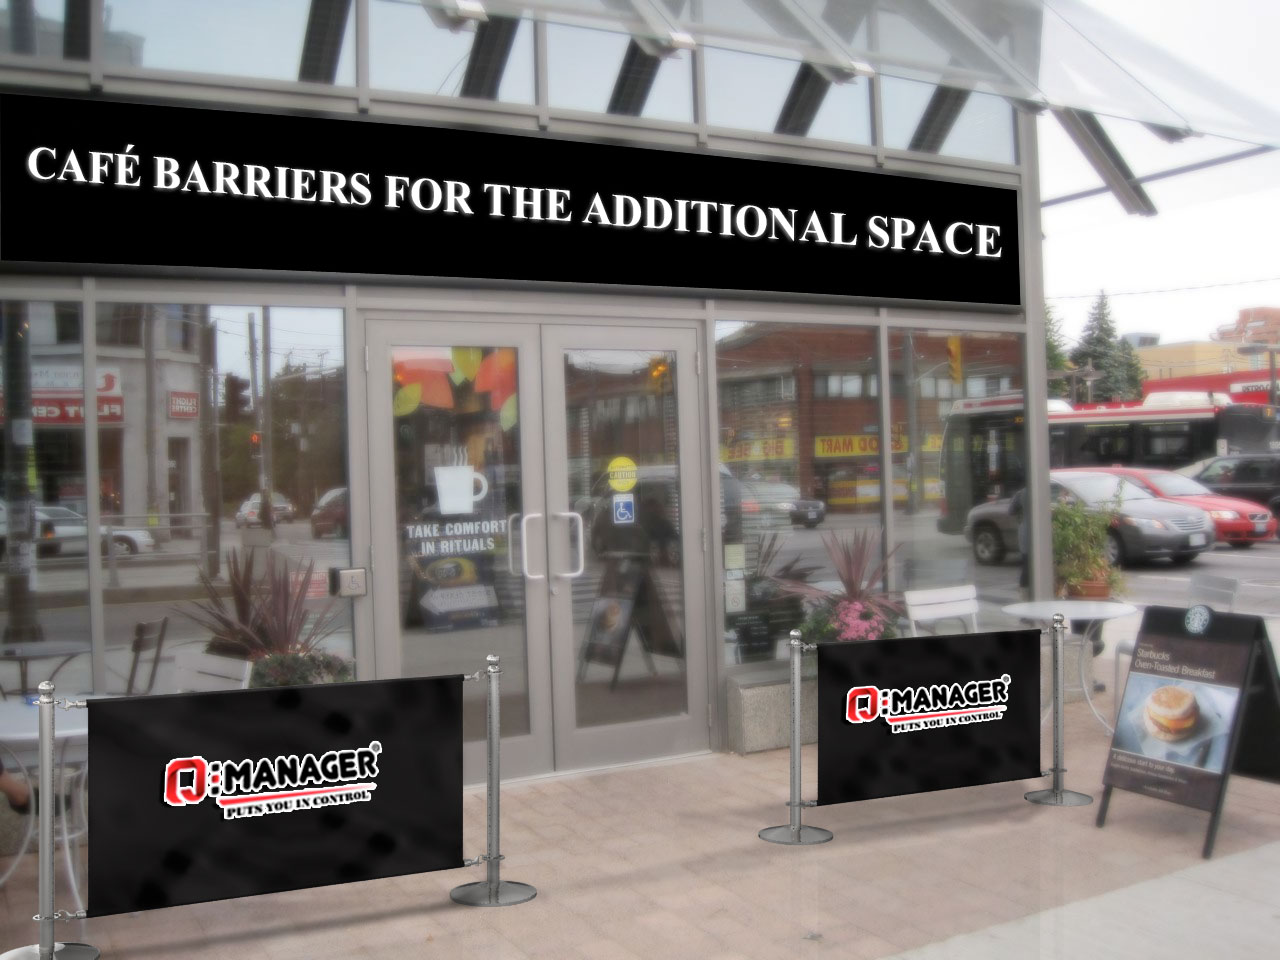 Café Barriers for the Additional Space